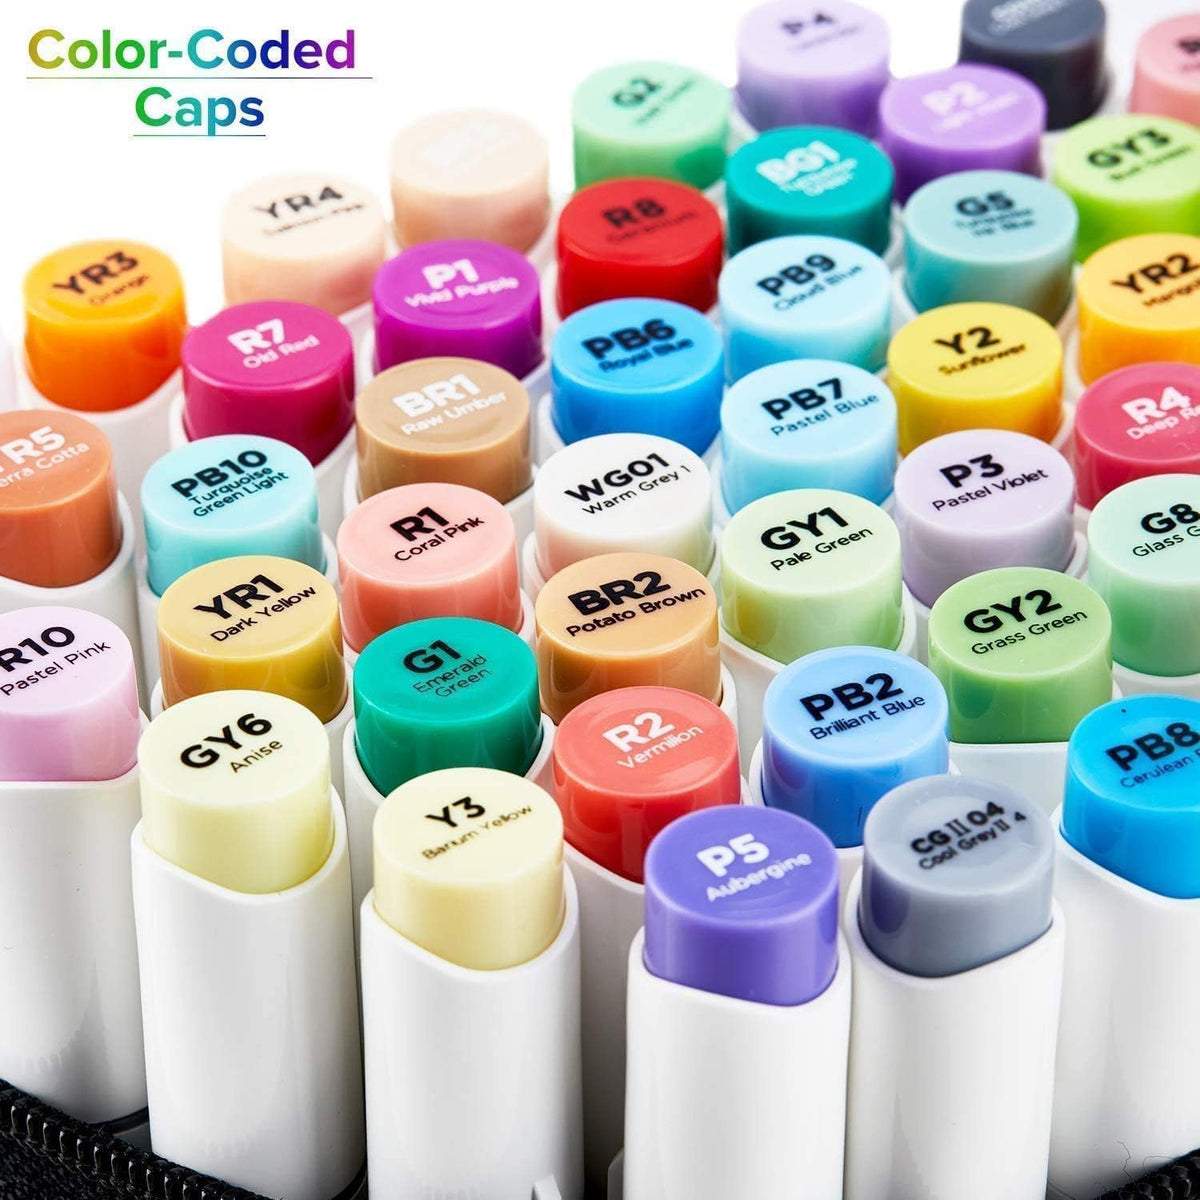 Ohuhu Markers for Coloring Books: 160 Colors Coloring - 01080026 - Mogahwi  Stationery & Office Eqpt